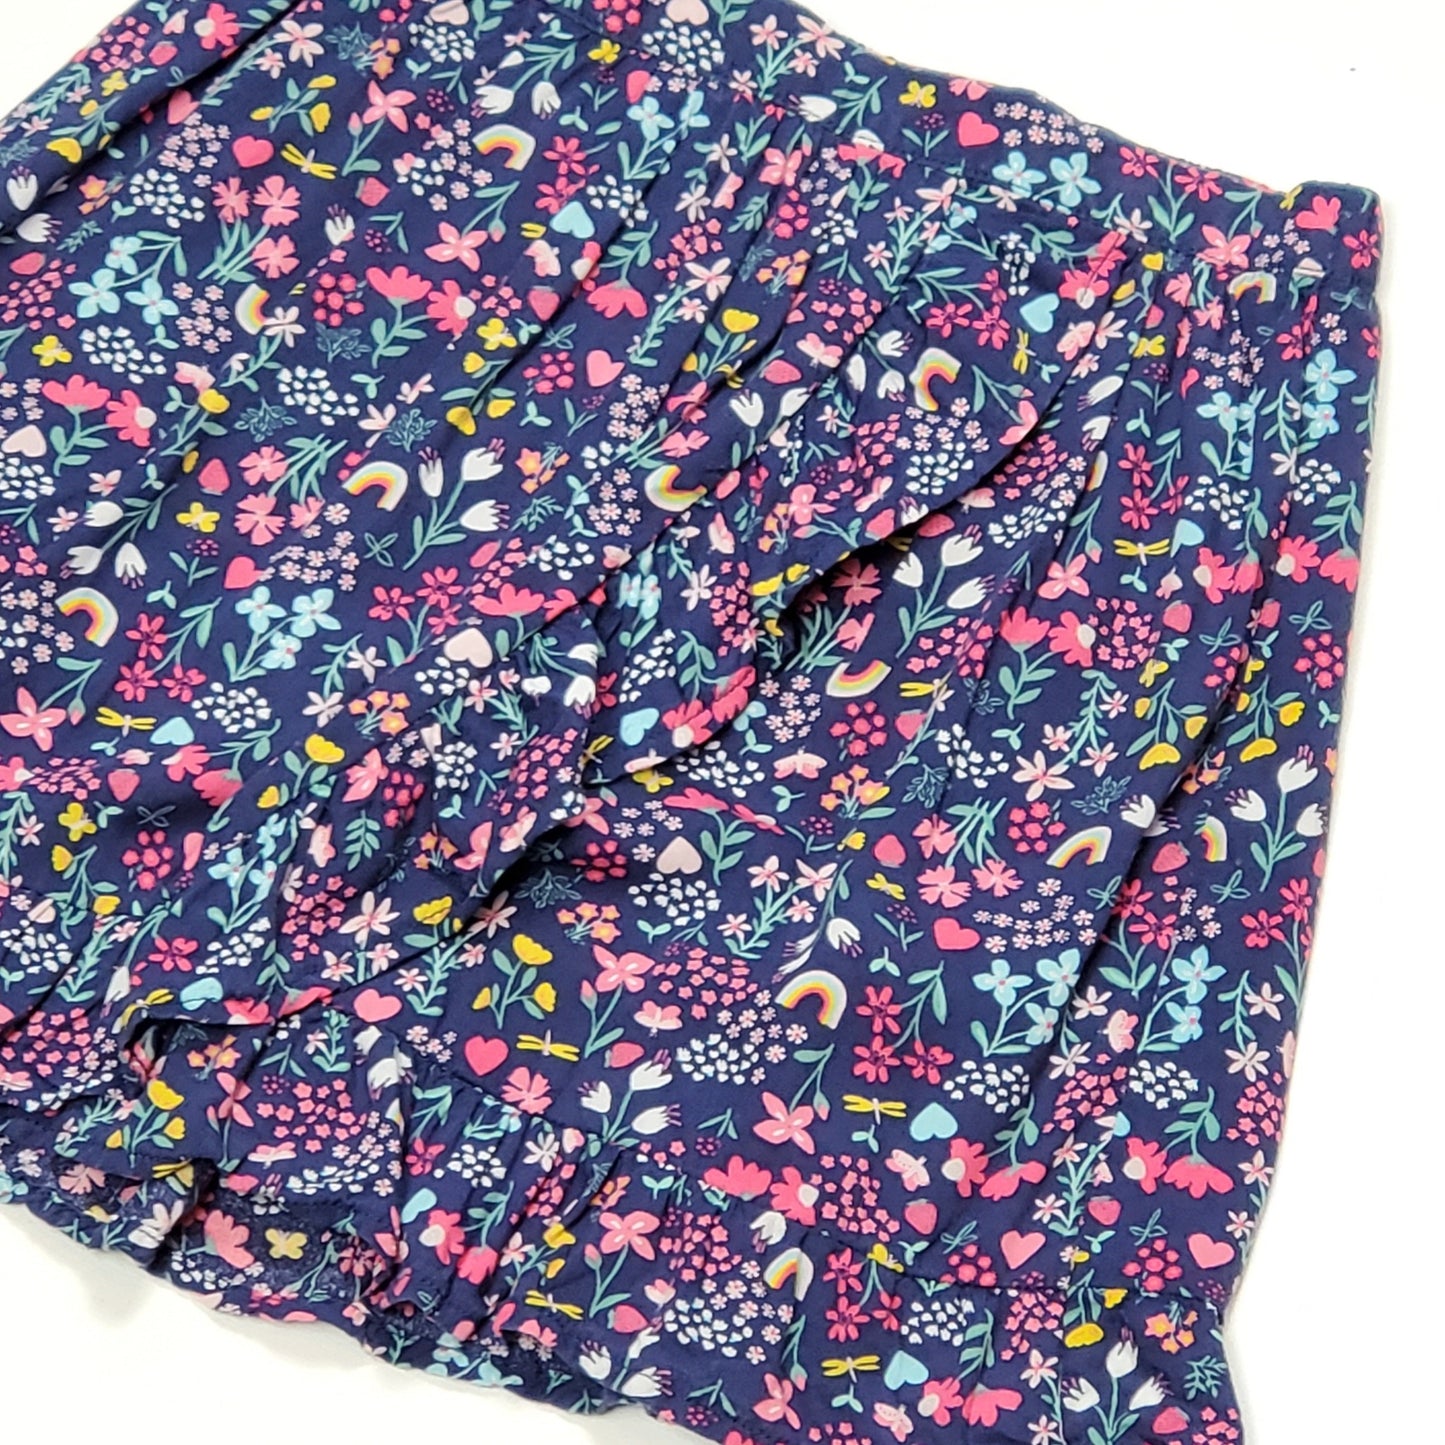 Carters Girls Rainbow Floral Ruffle Skort Size 7 Used View 2